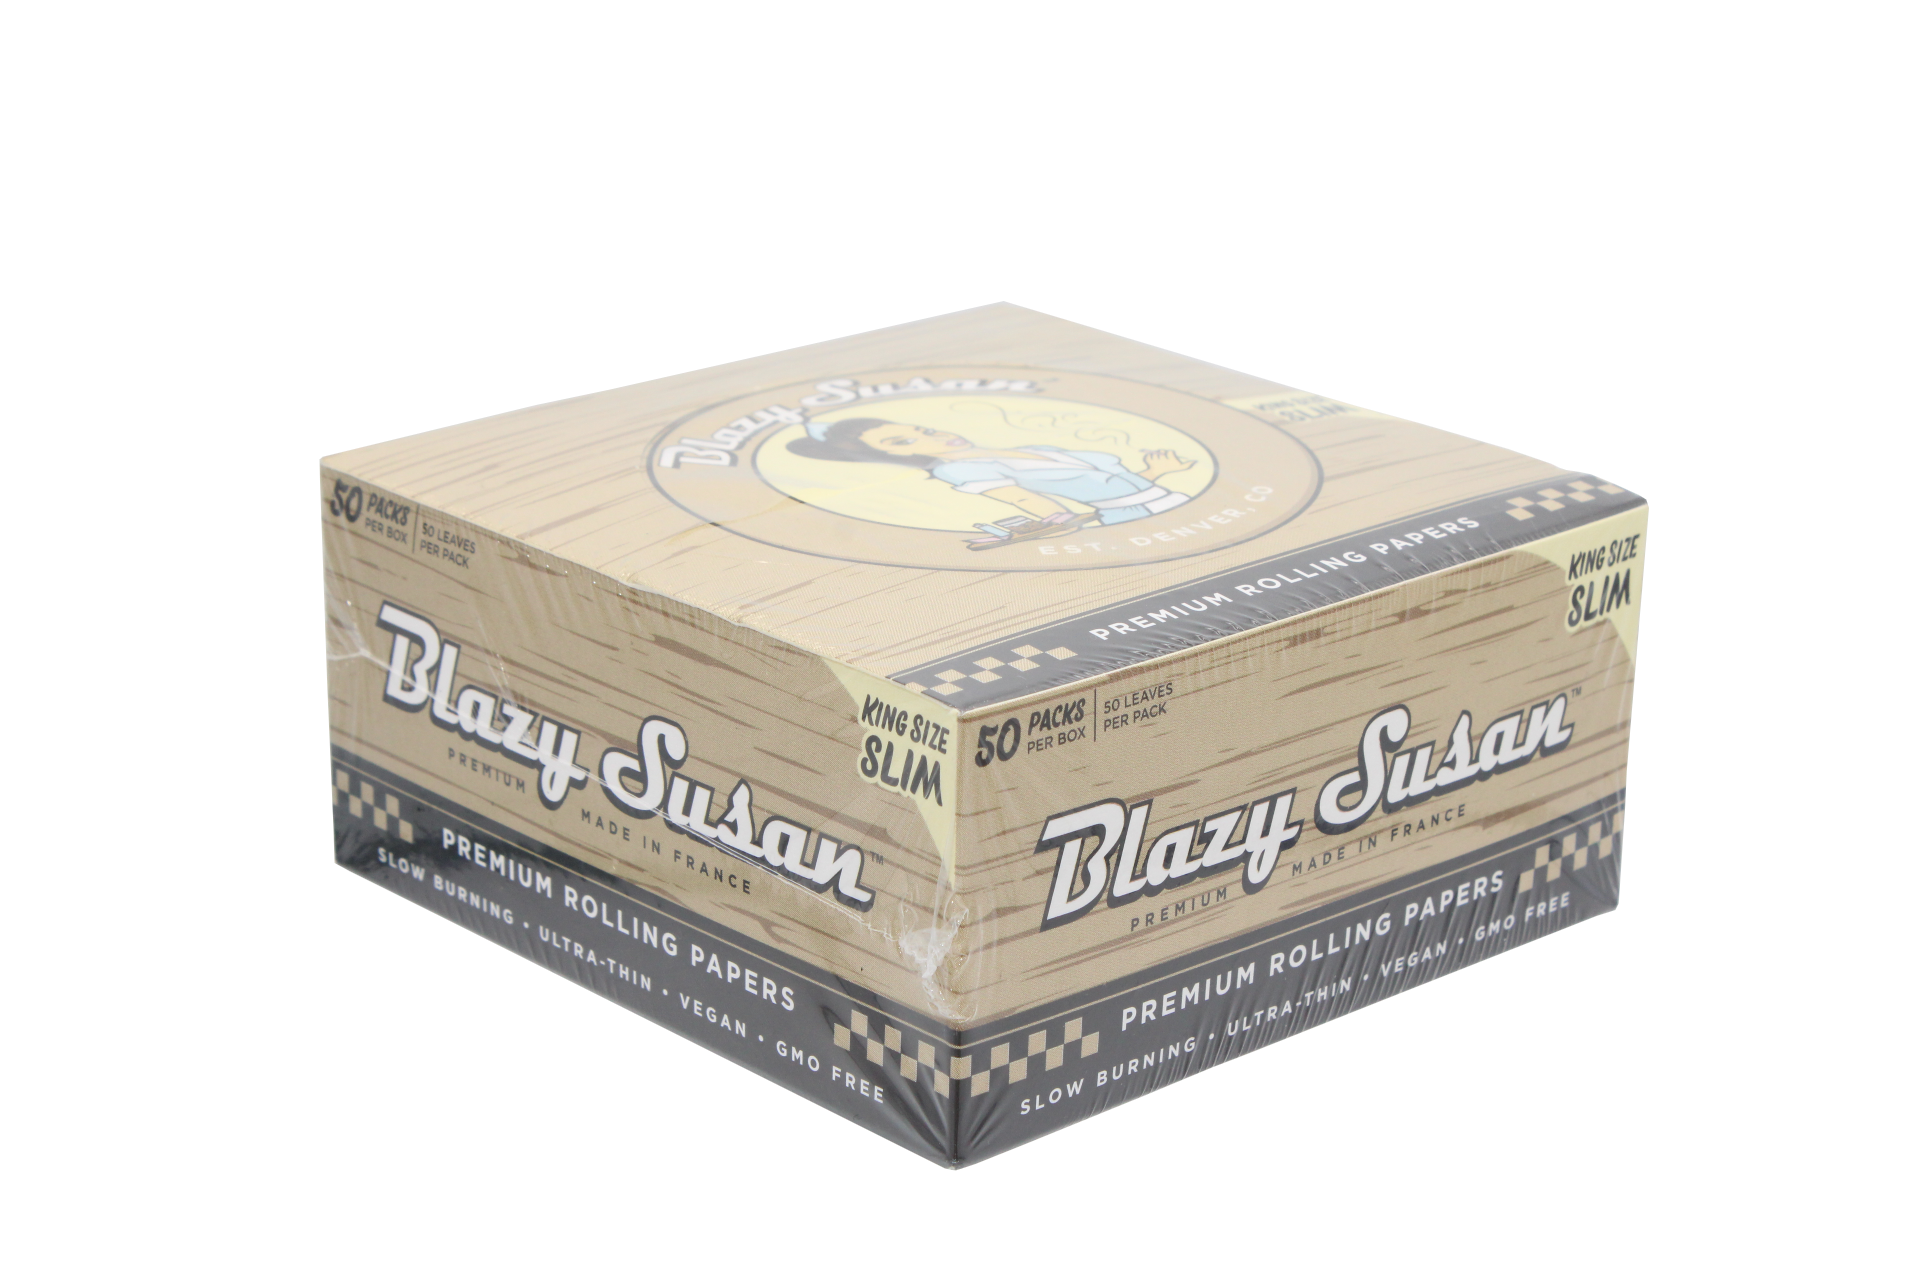 BLAZY SUSAN UNBLEACHED ROLLING PAPERS KING SIZE SLIM 50CT